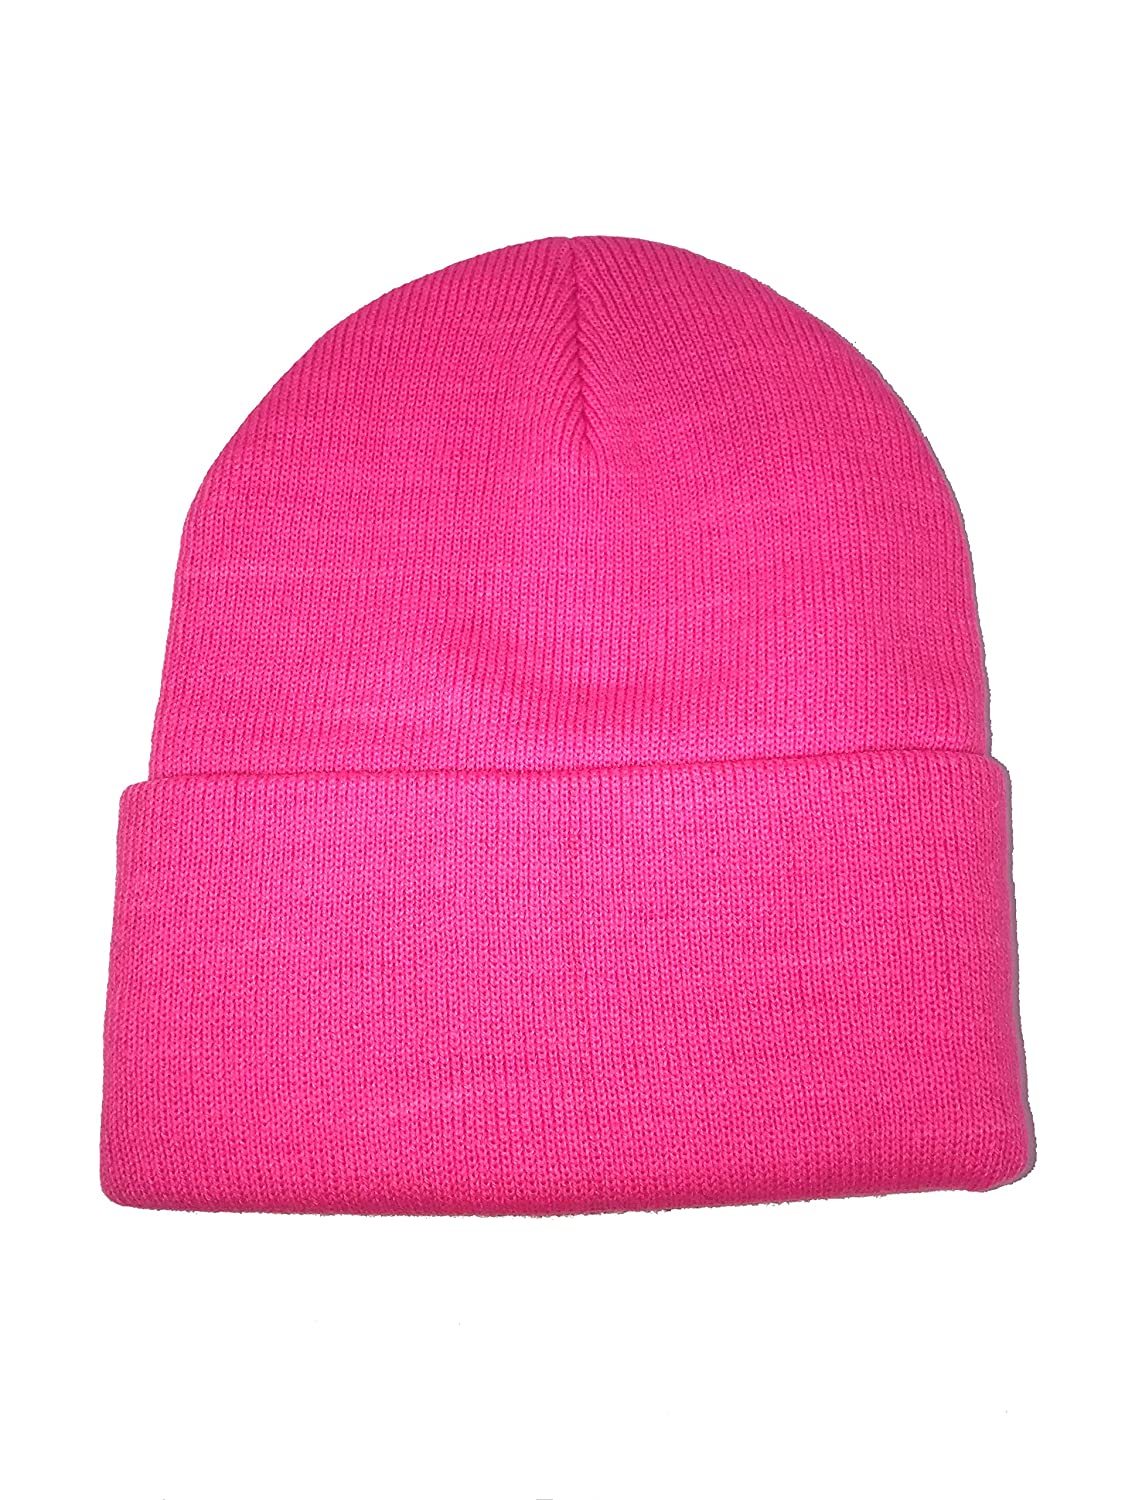 DECKY High Visibility Neon Colored Cuffed Long Beanie Winter Hat